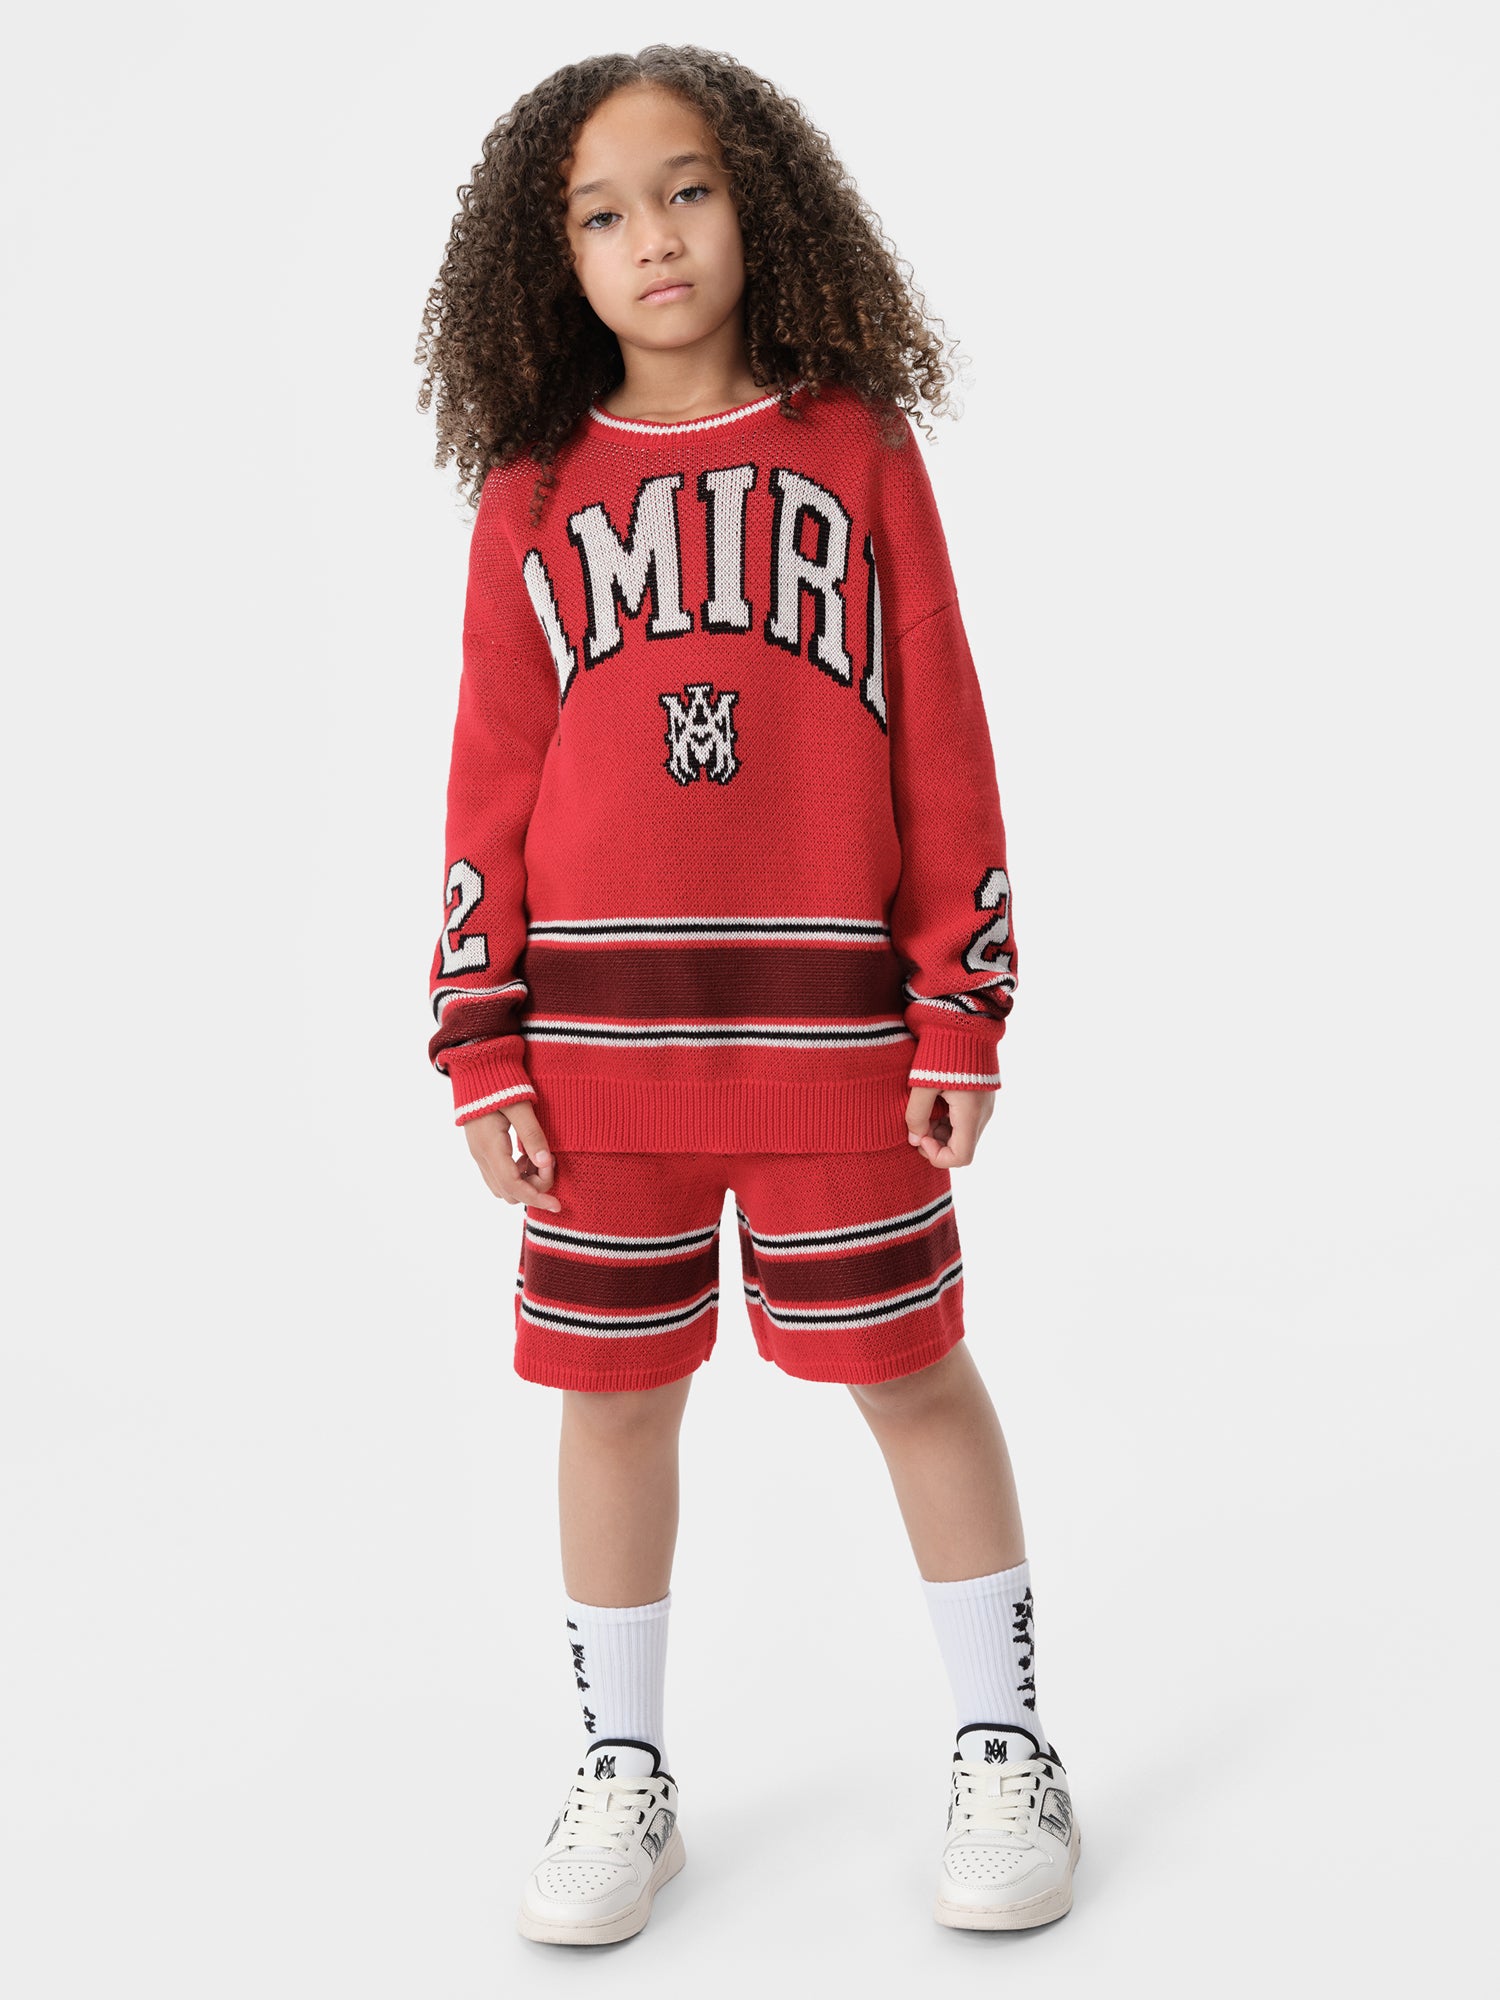 Product KIDS - MA STRIPE SHORT - Red featured image